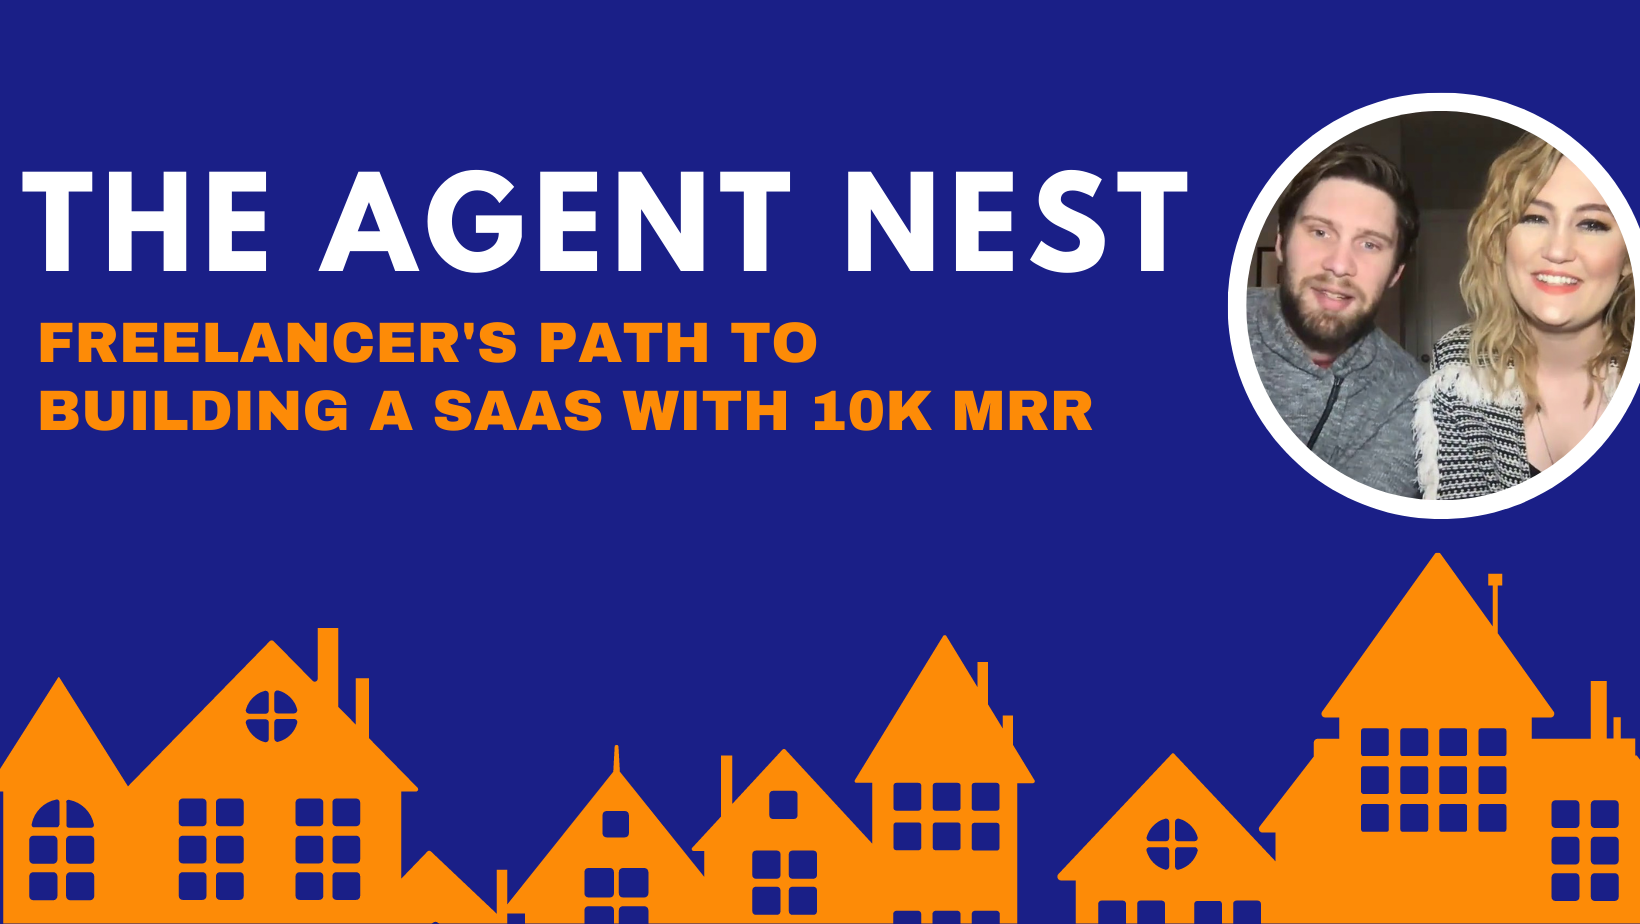 Freelancer's path to building a SaaS with $10K MRR 🏡| Agent Nest